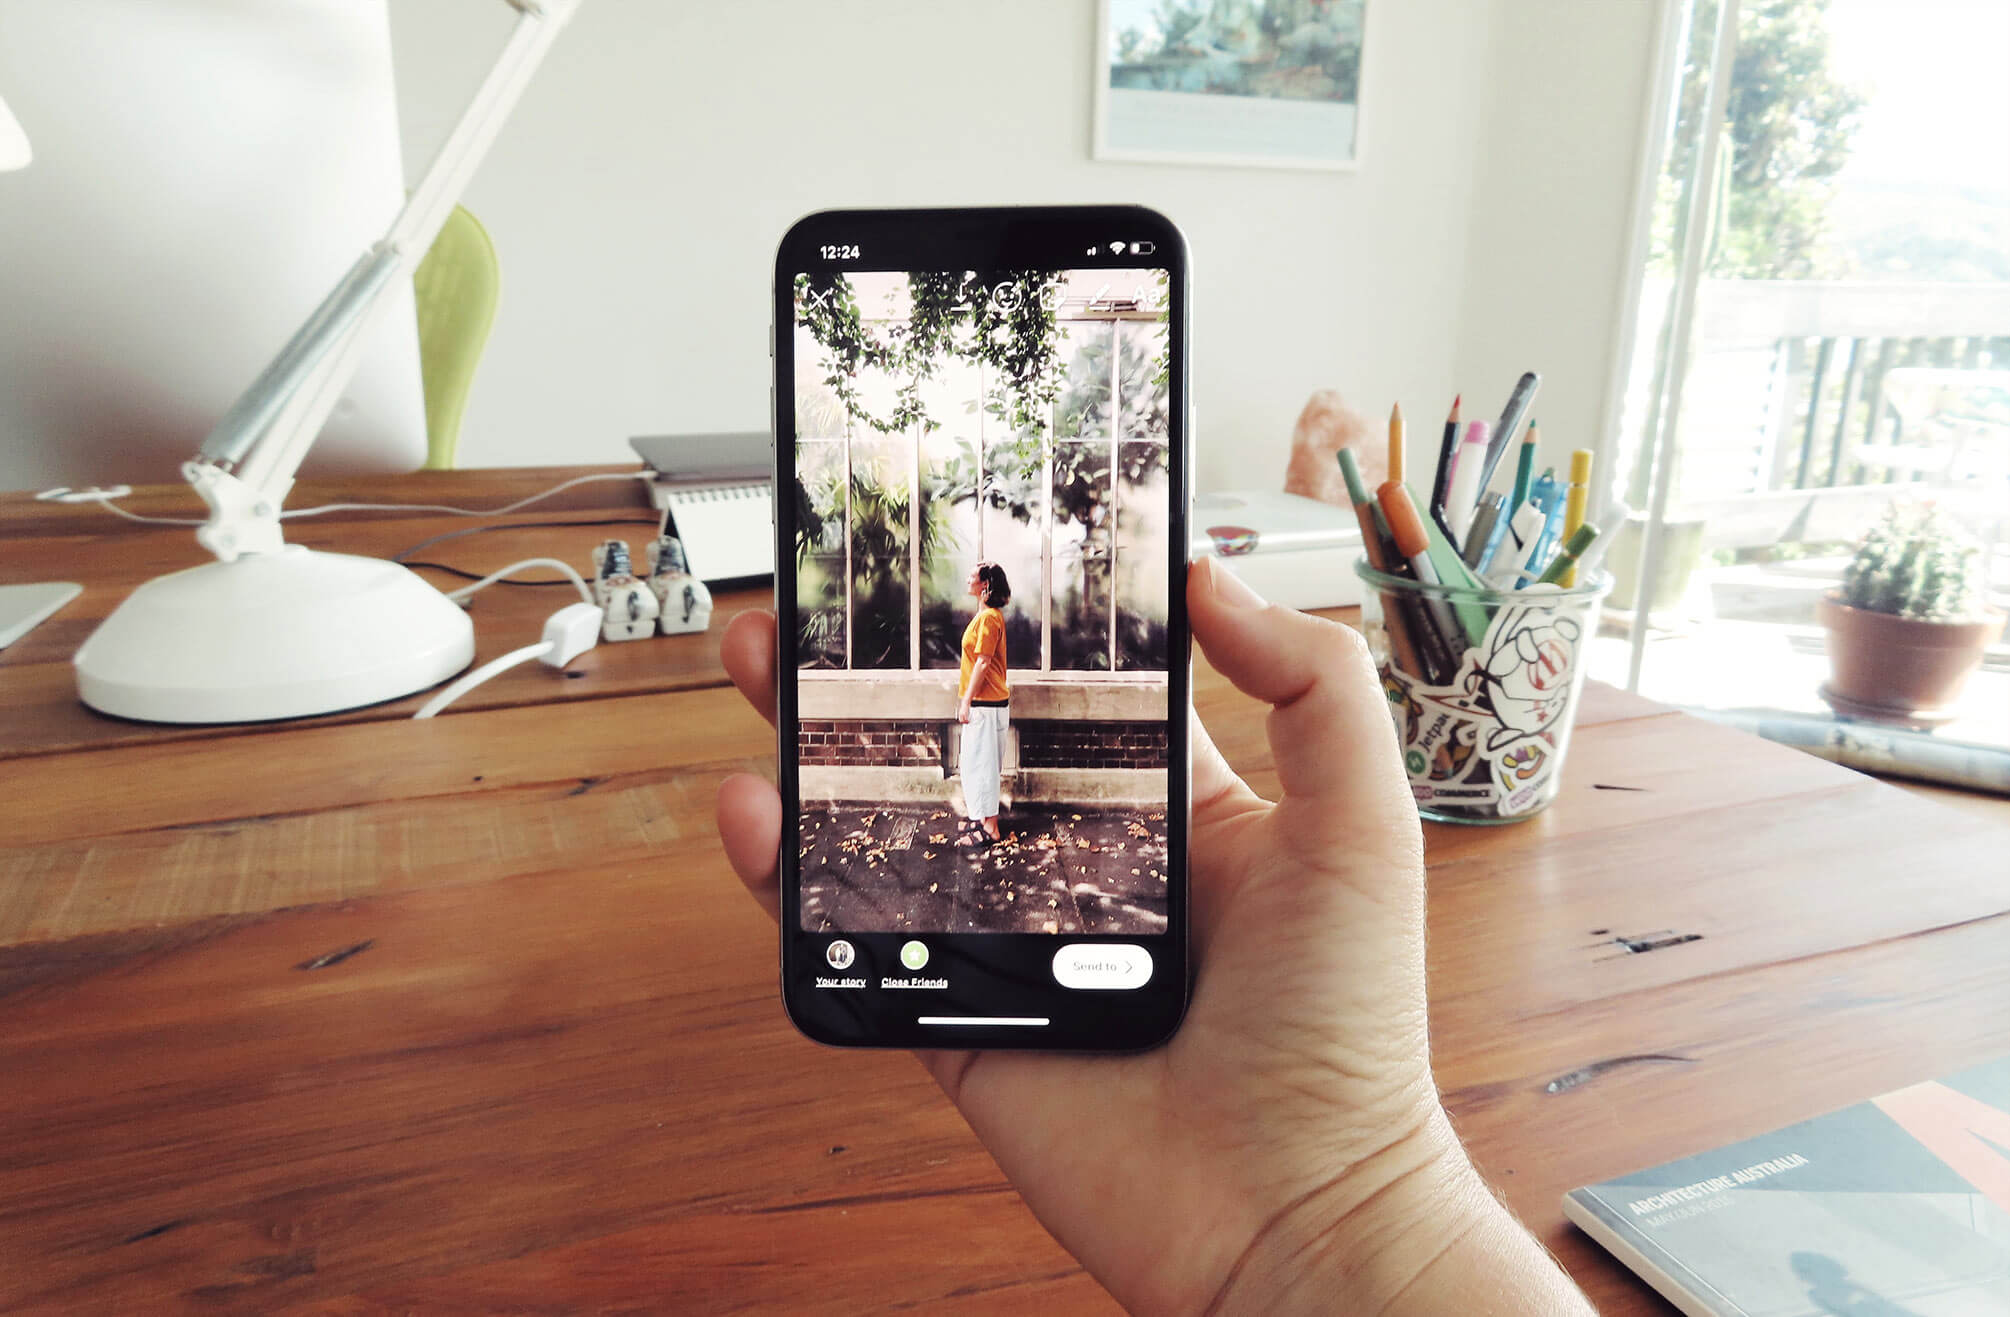 3 Cool Instagram story ideas you won’t find anywhere else